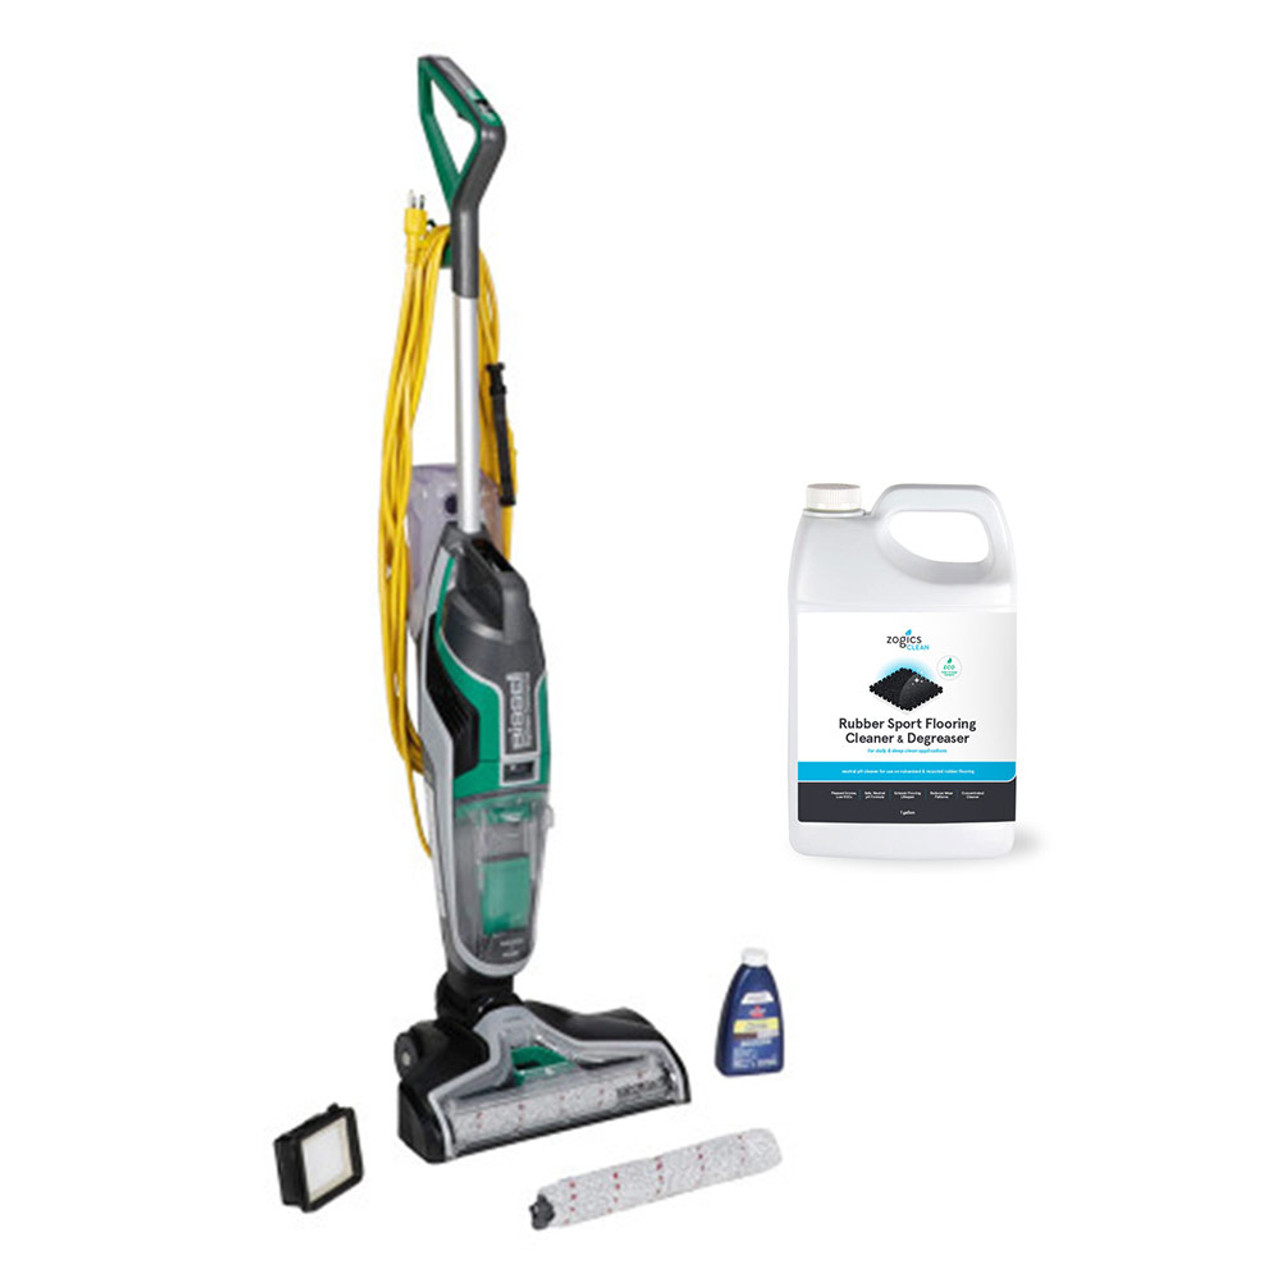 Gleem Home Cleaning - Cleaning Products and Equipment Brought to